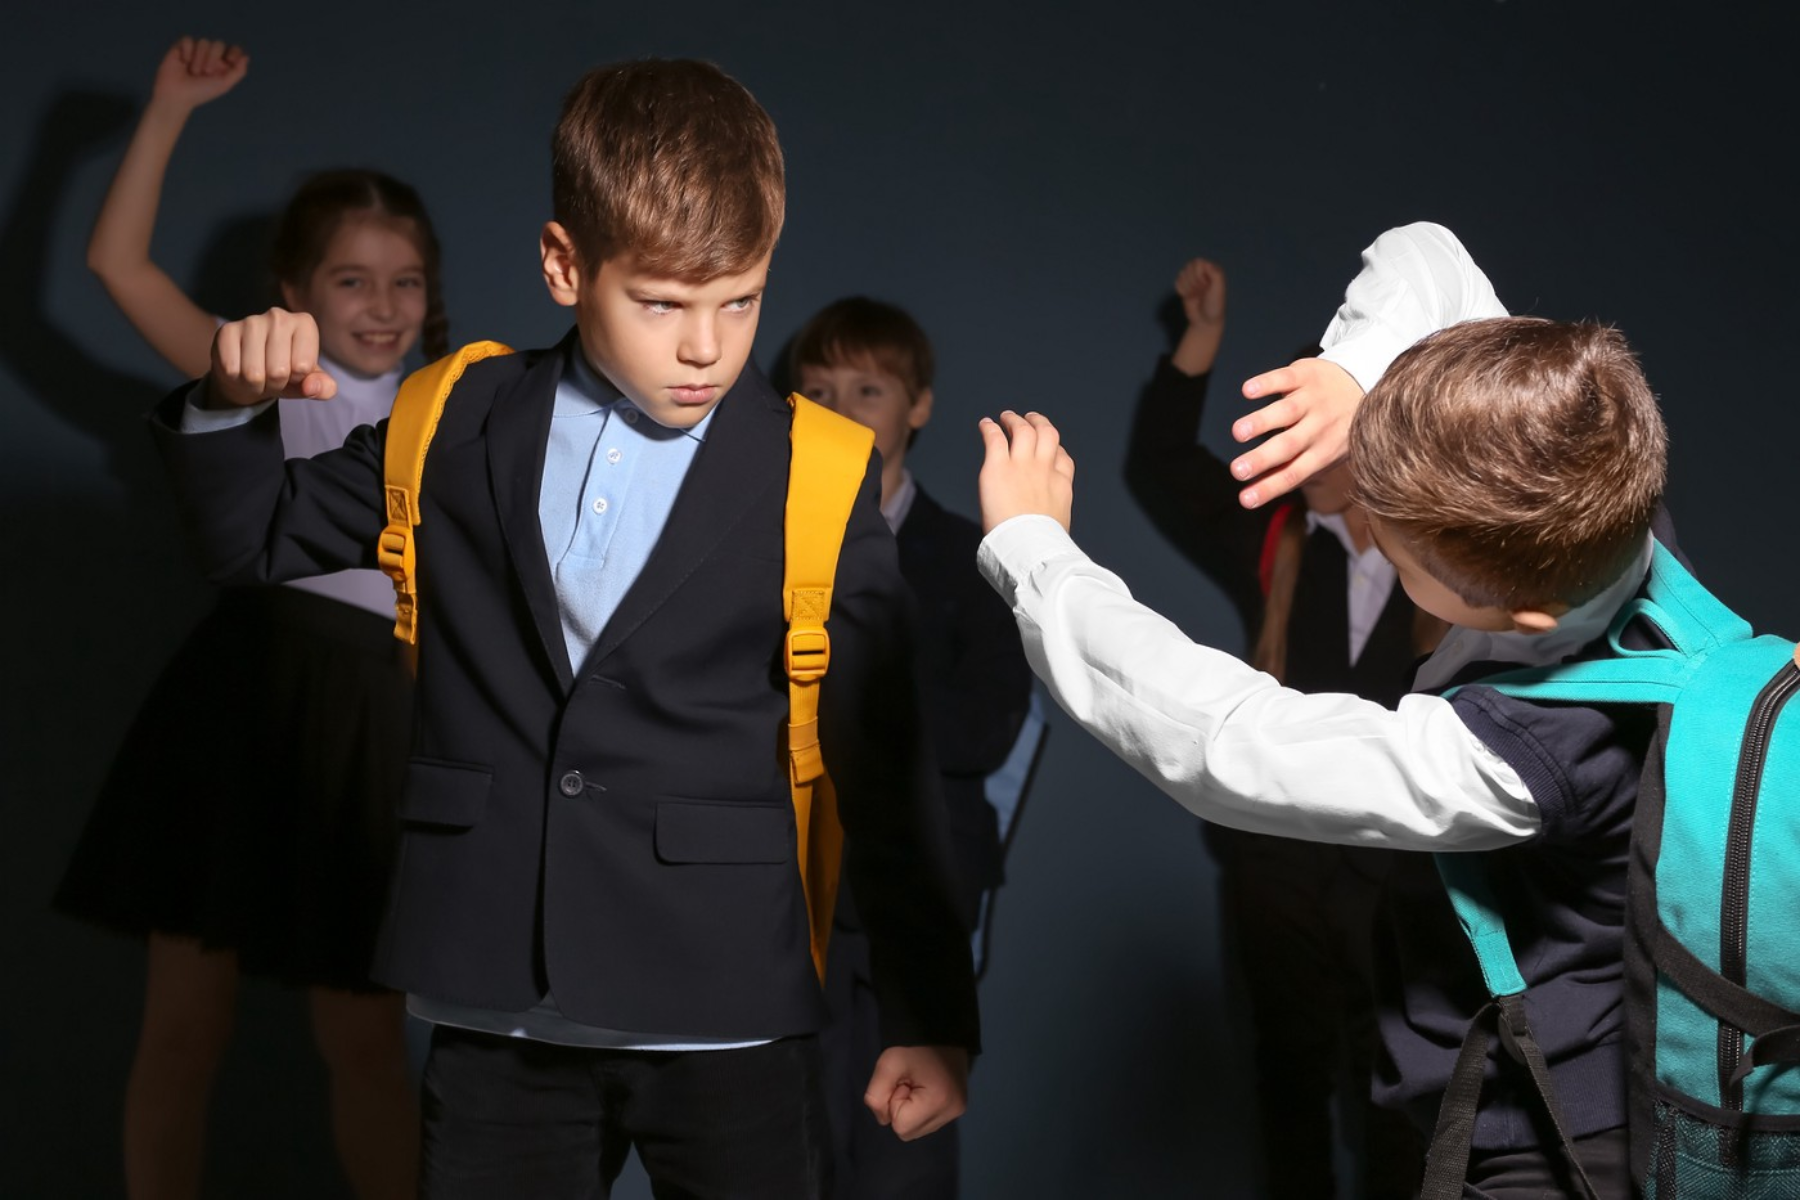 Bully Fights Back - Is It Right To Fight Against Bully?